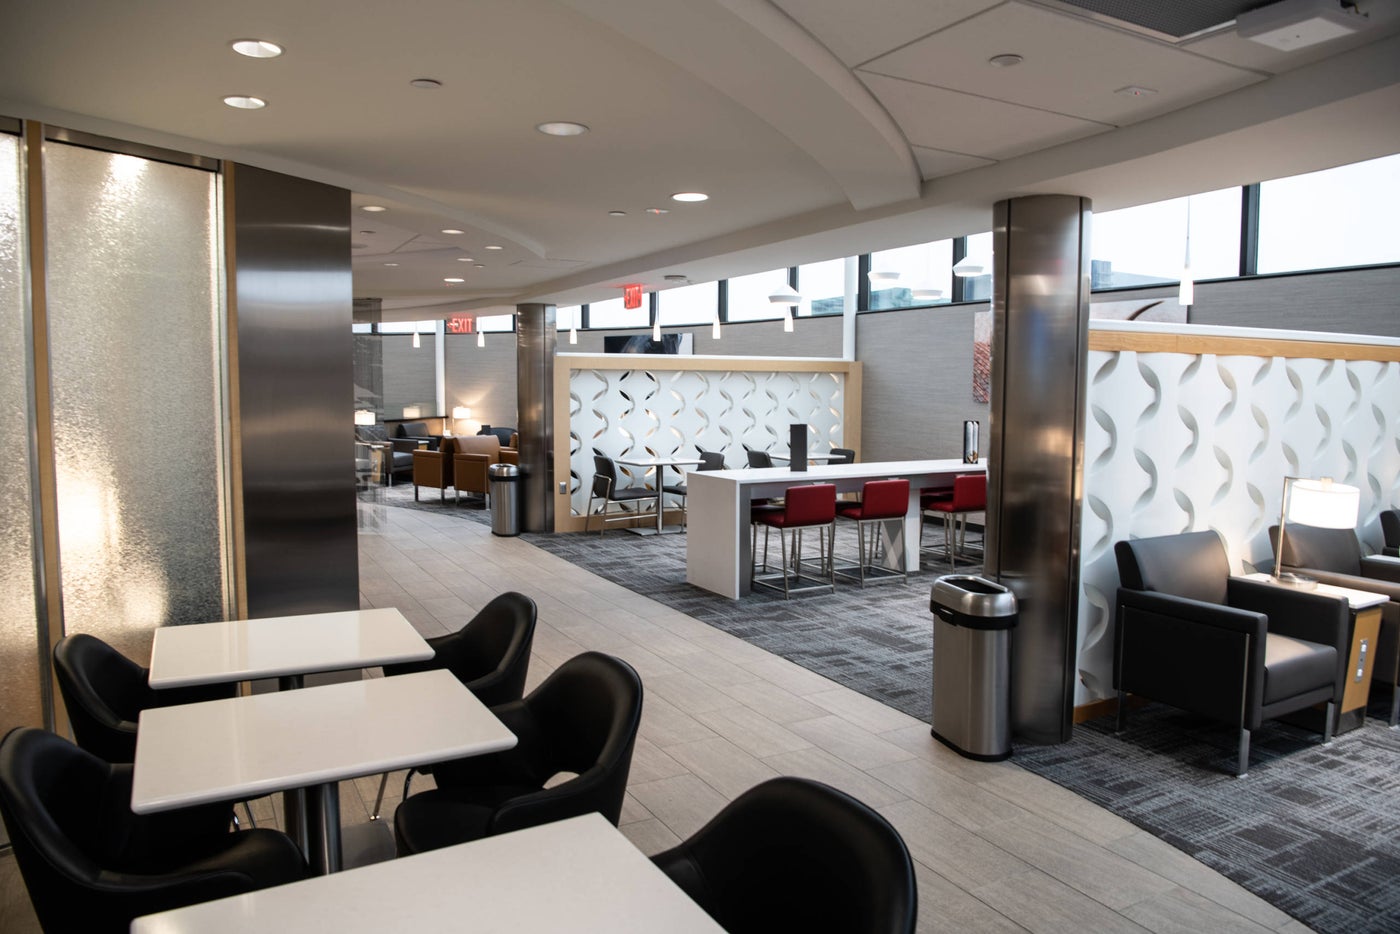 American now has an Admiral's Club in every DFW terminal